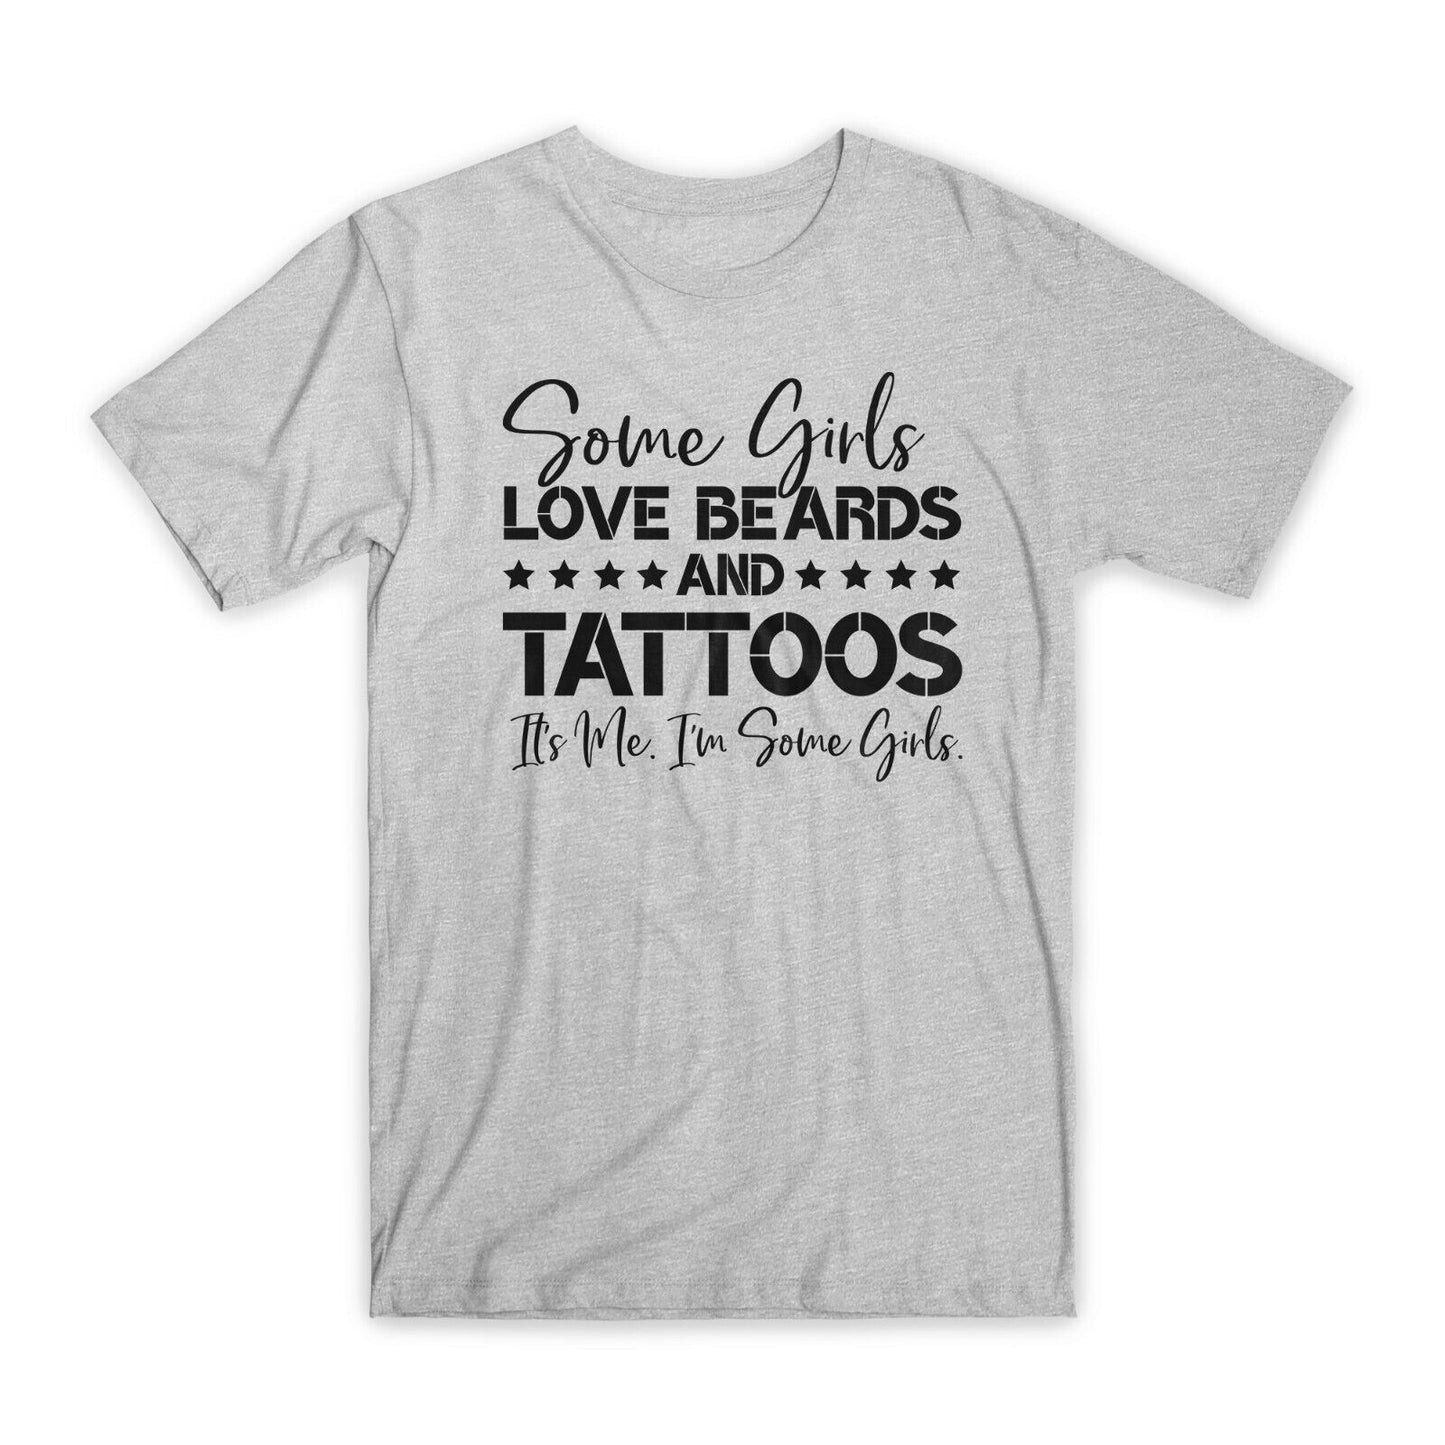 Some Girls Love Beards and Tattoos T-Shirt Premium Soft Cotton Funny T Gift NEW